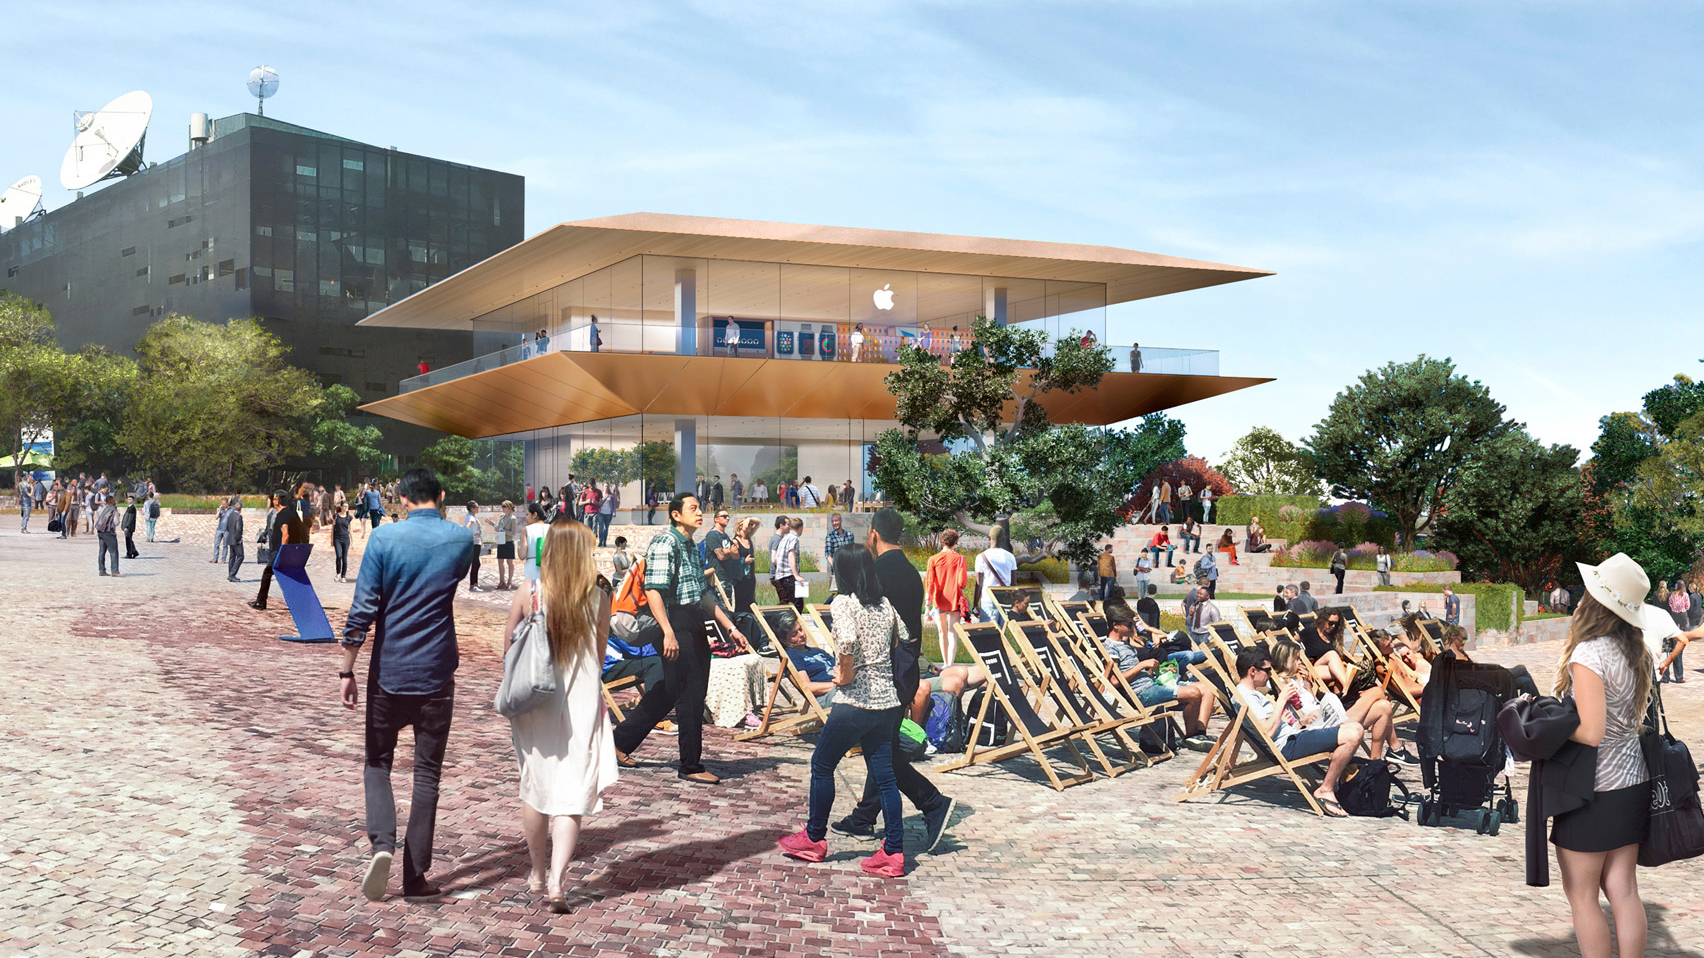 This week, BIG designed another Google campus and Melbourne residents protested a new Apple Store